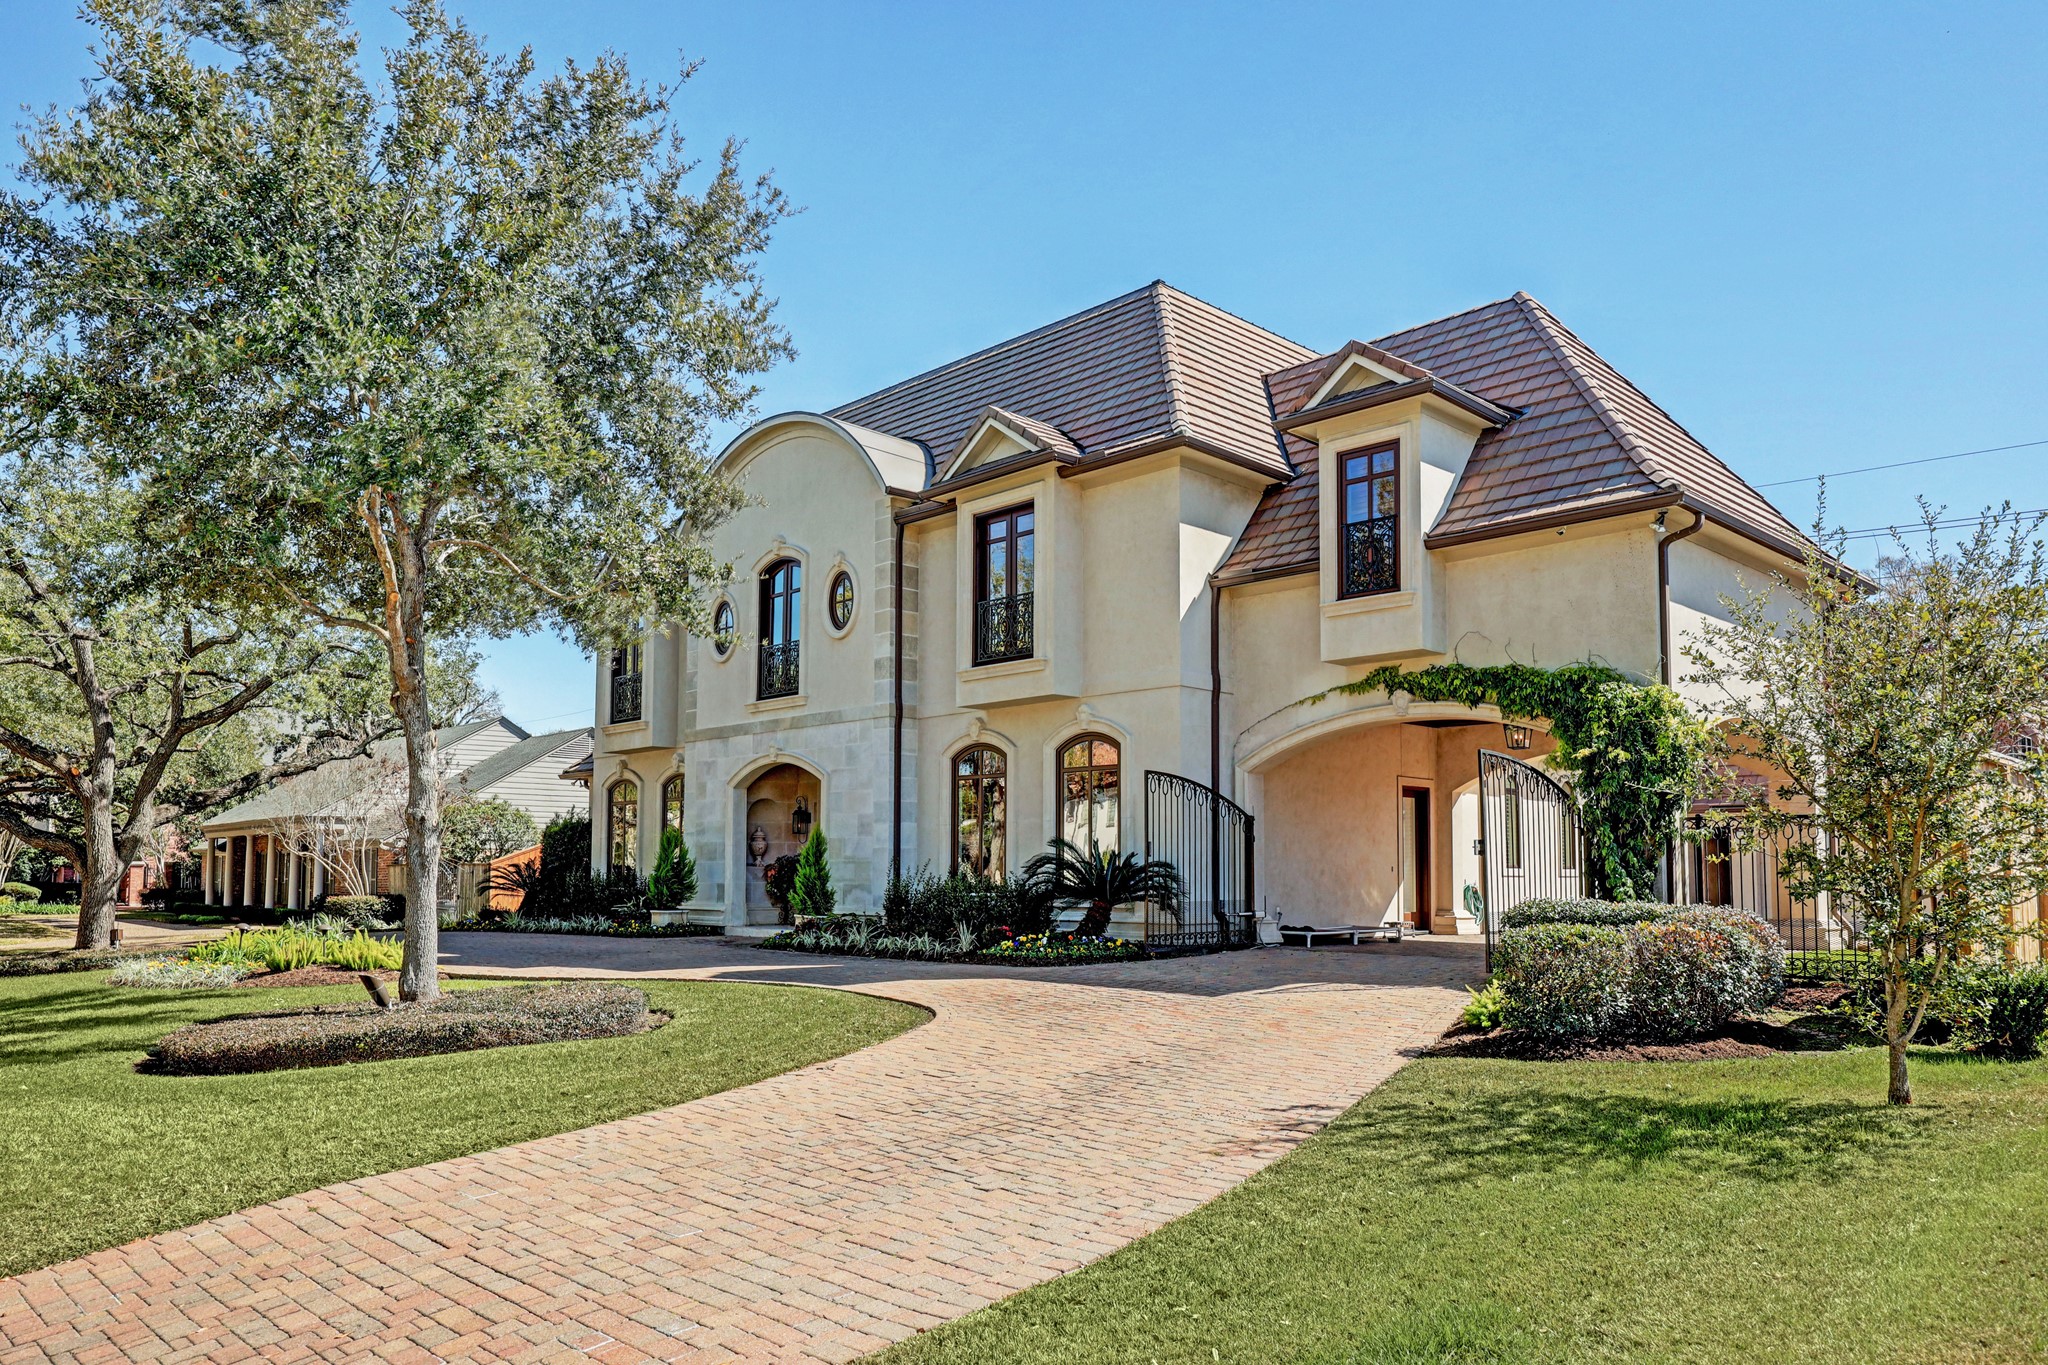 A circular drive, gated porte-cochère and four-car garage provide abundant parking in this gorgeous Tanglewood showplace.